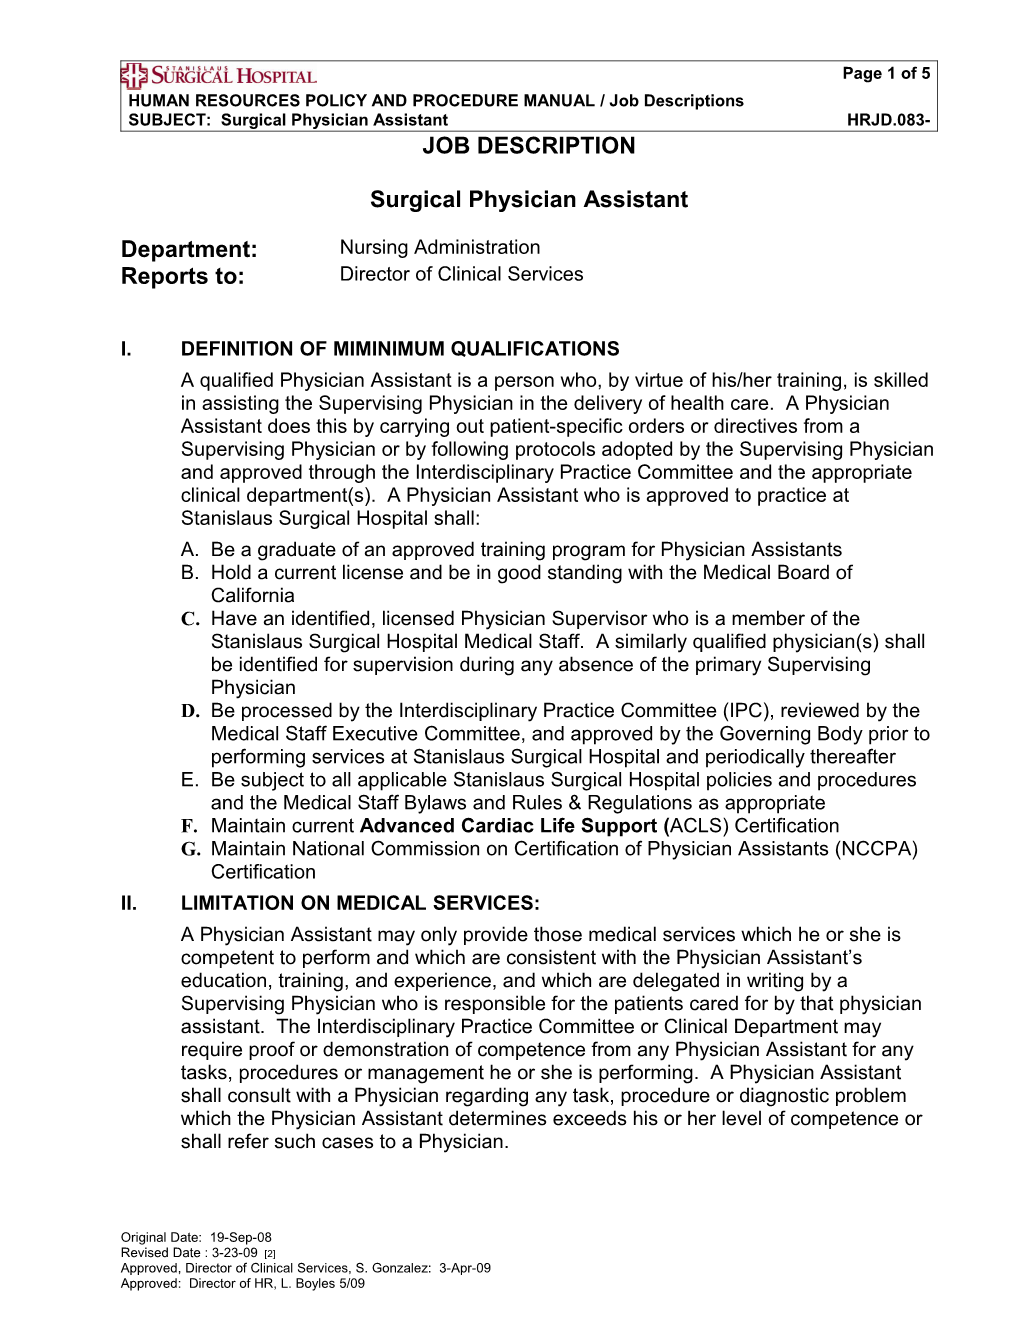 HRJD.083 Surgical Physician Assistant